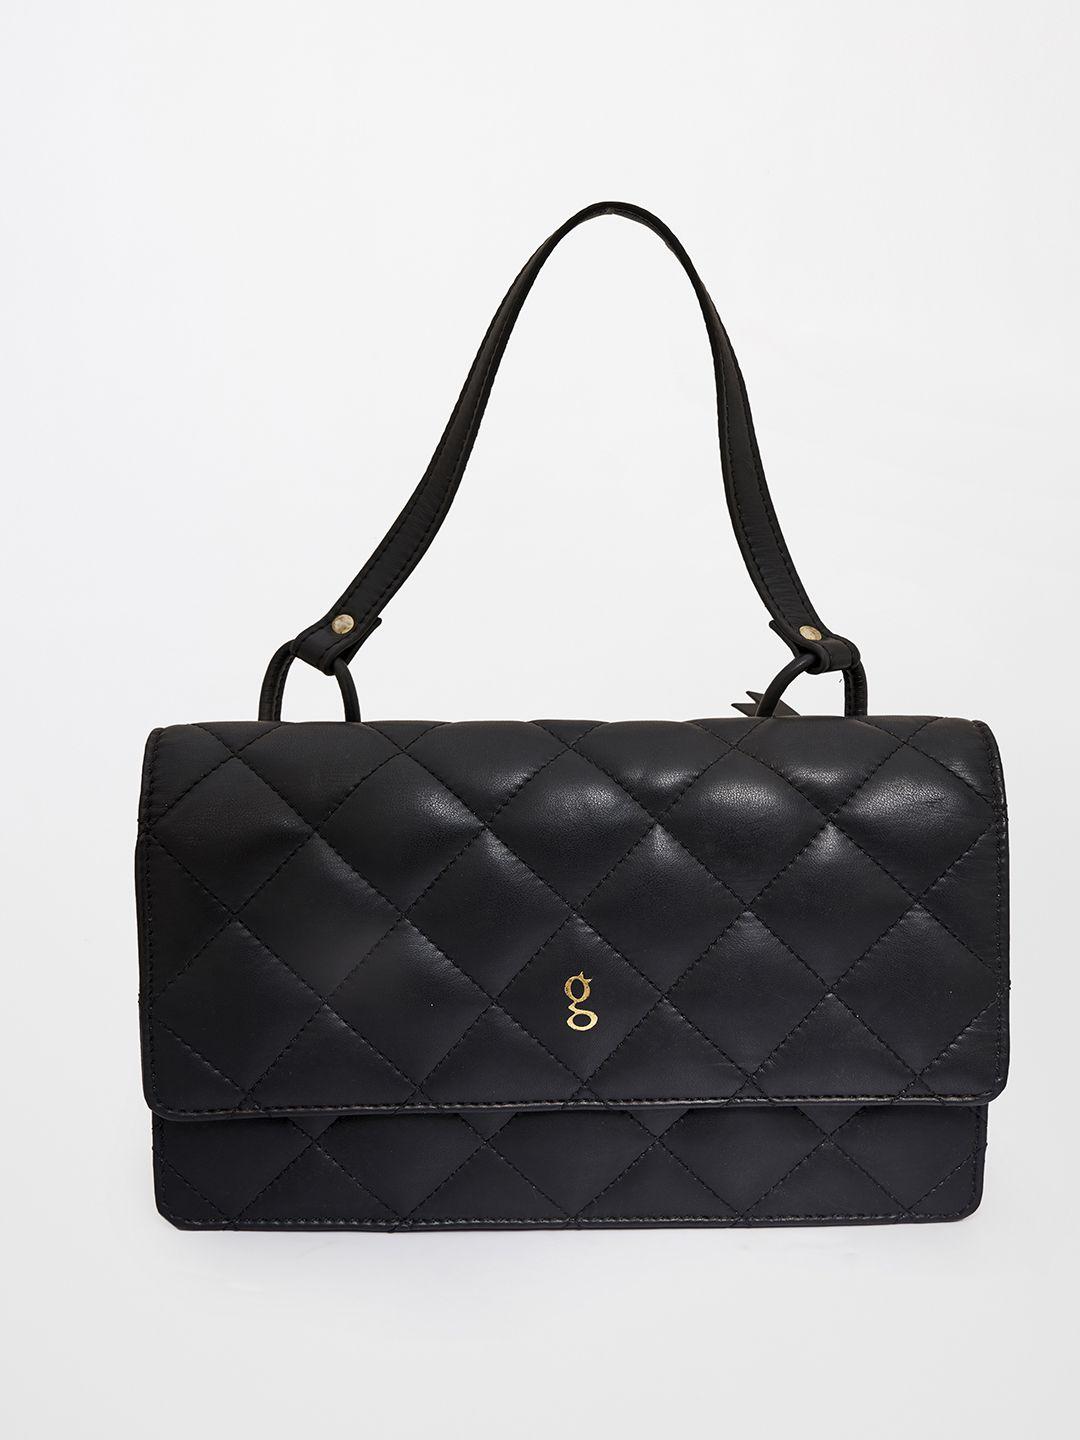 global desi black textured structured handheld bag with quilted